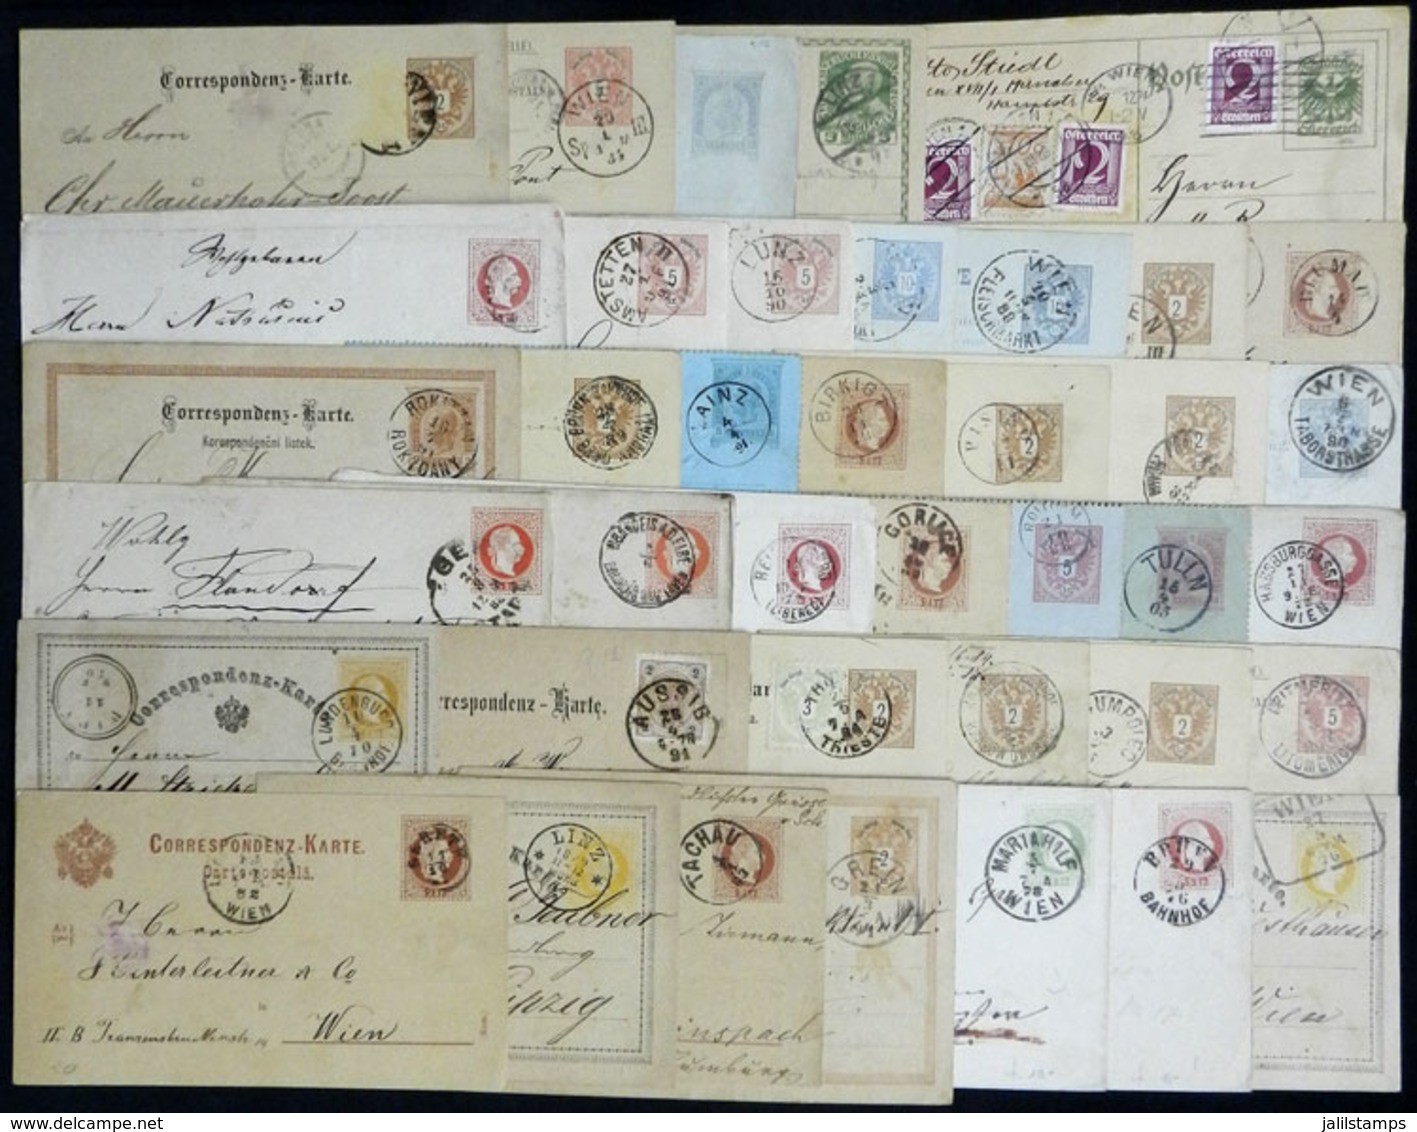 AUSTRIA: 39 Used Postal Stationeries, Most Very Old, There Are Scarce And Interesting Postmarks, Fine To Very Fine Gener - Covers & Documents